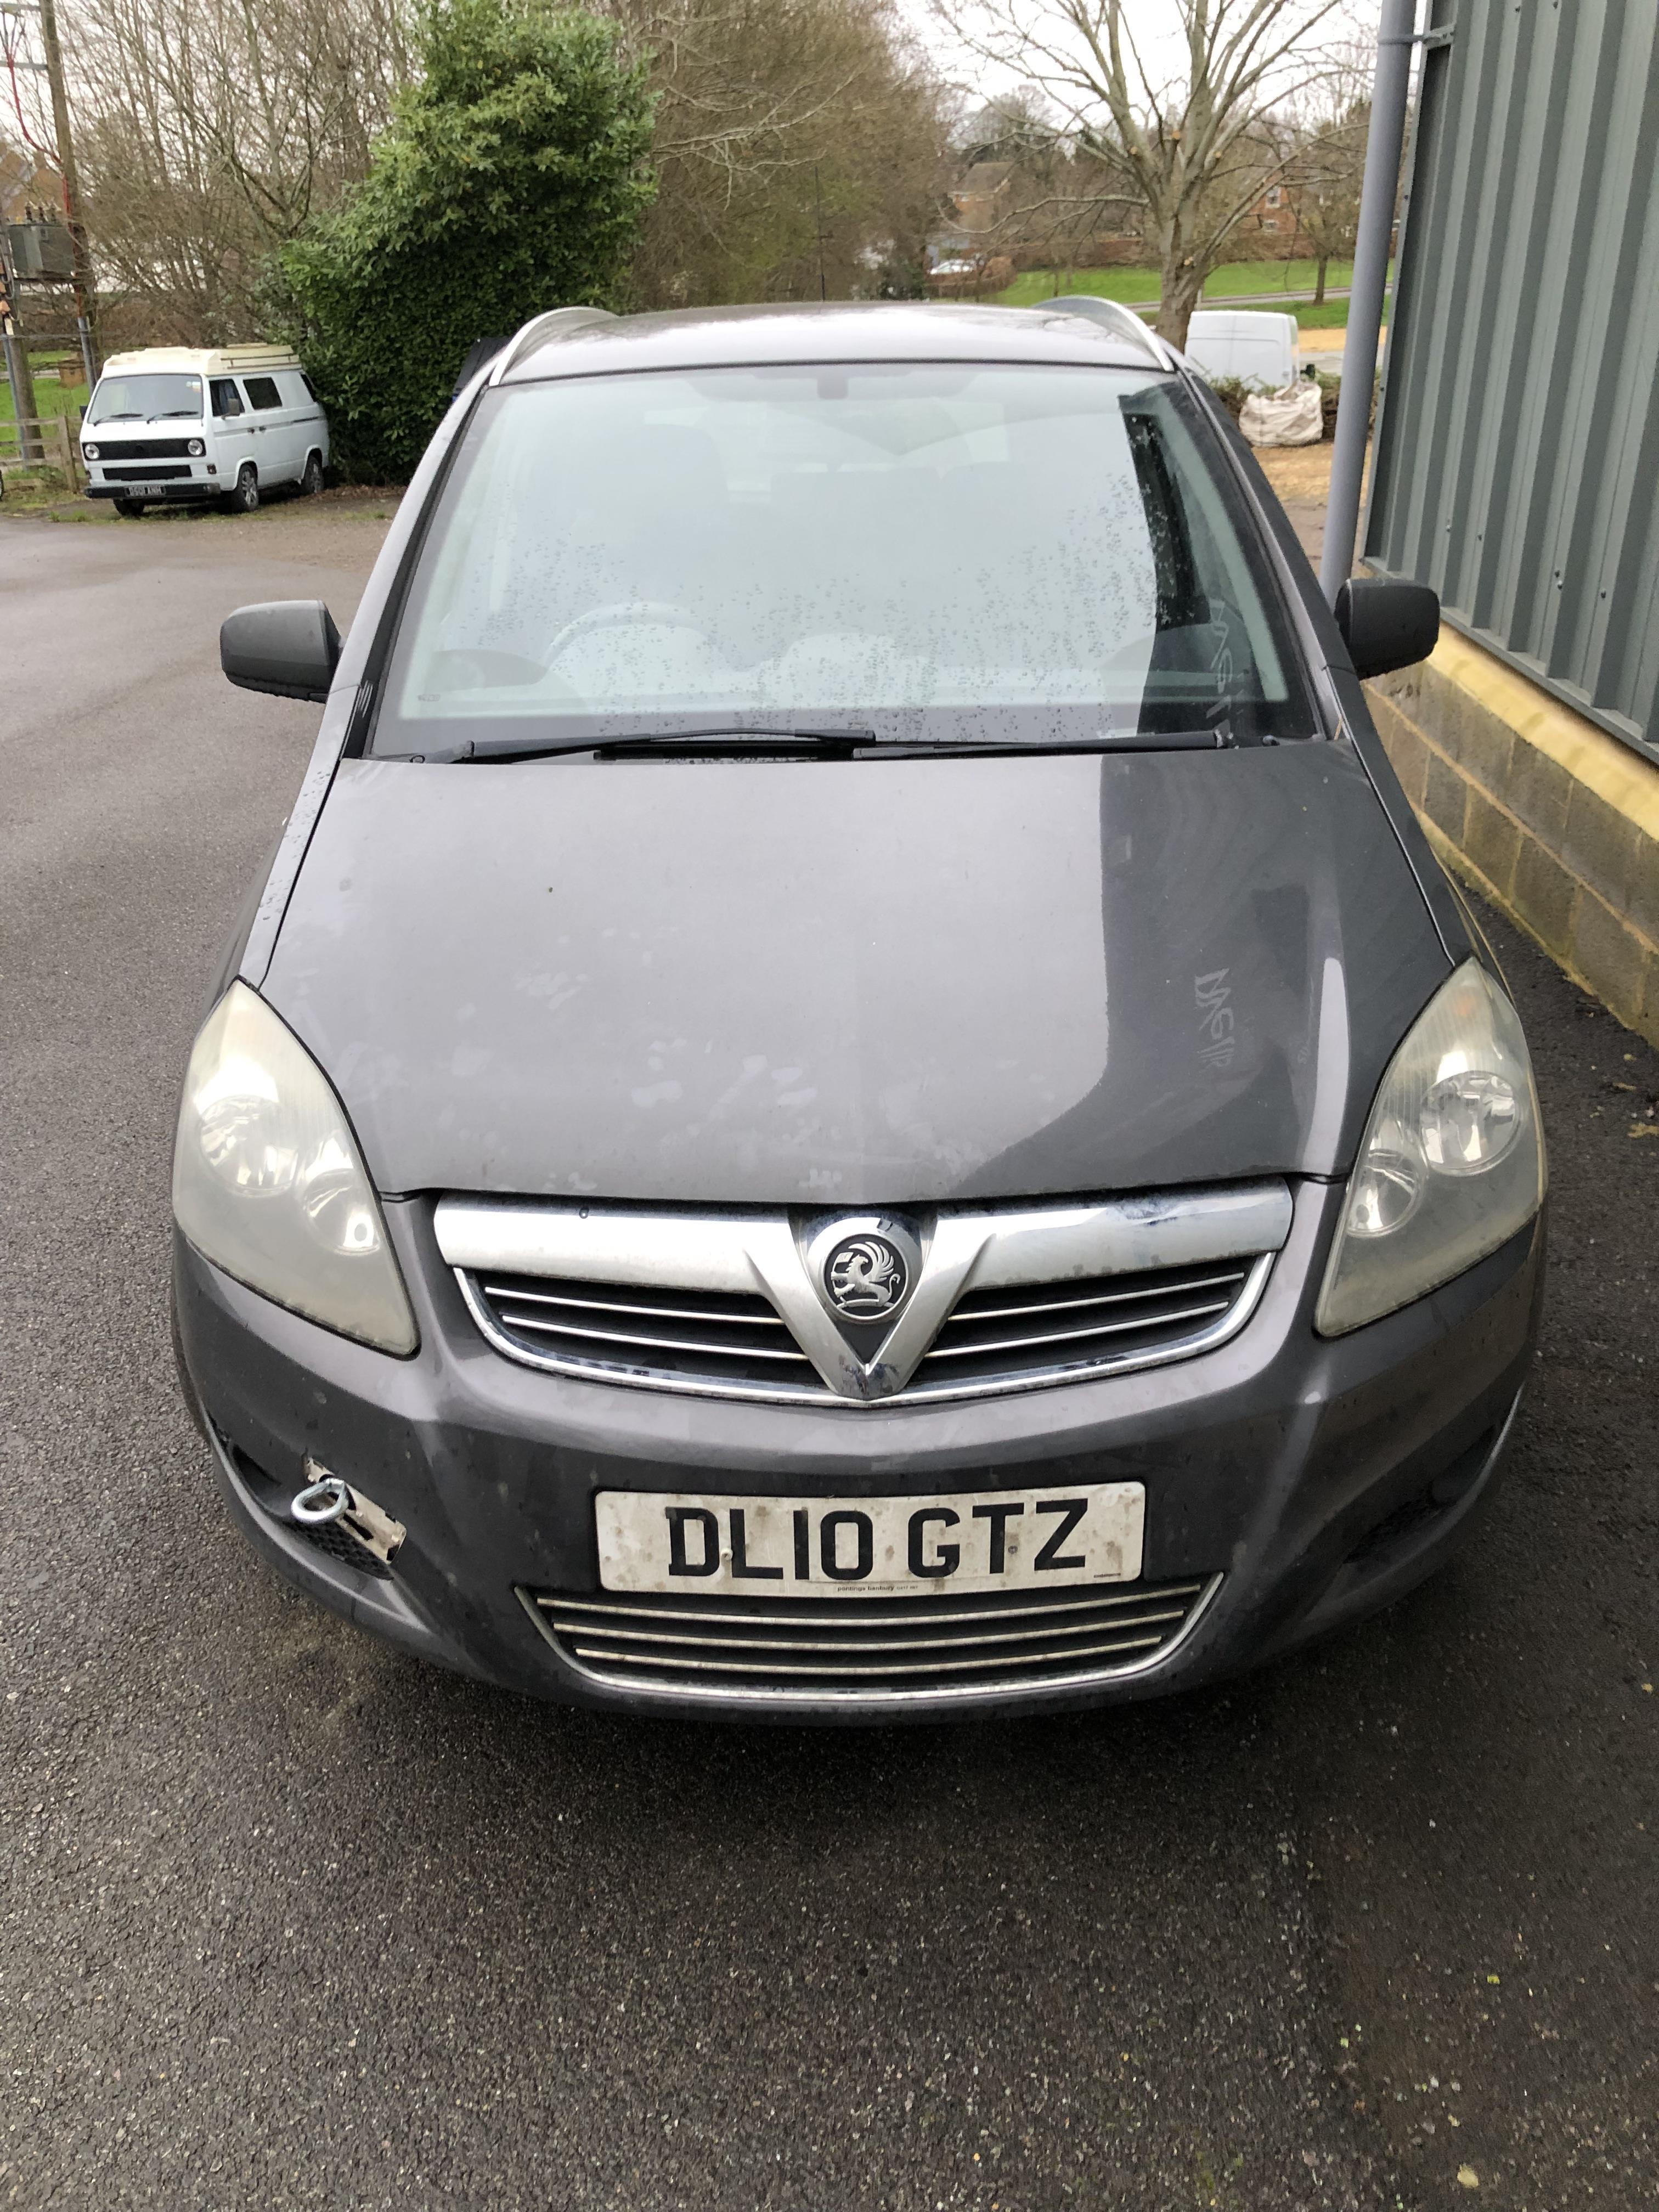 A 2010 VAUXHALL ZAFIRA 1.8 PETROL FOR SPARES OR REPAIRS (NON RUNNER) WITH 3+MONTHS MOT. - Image 2 of 11